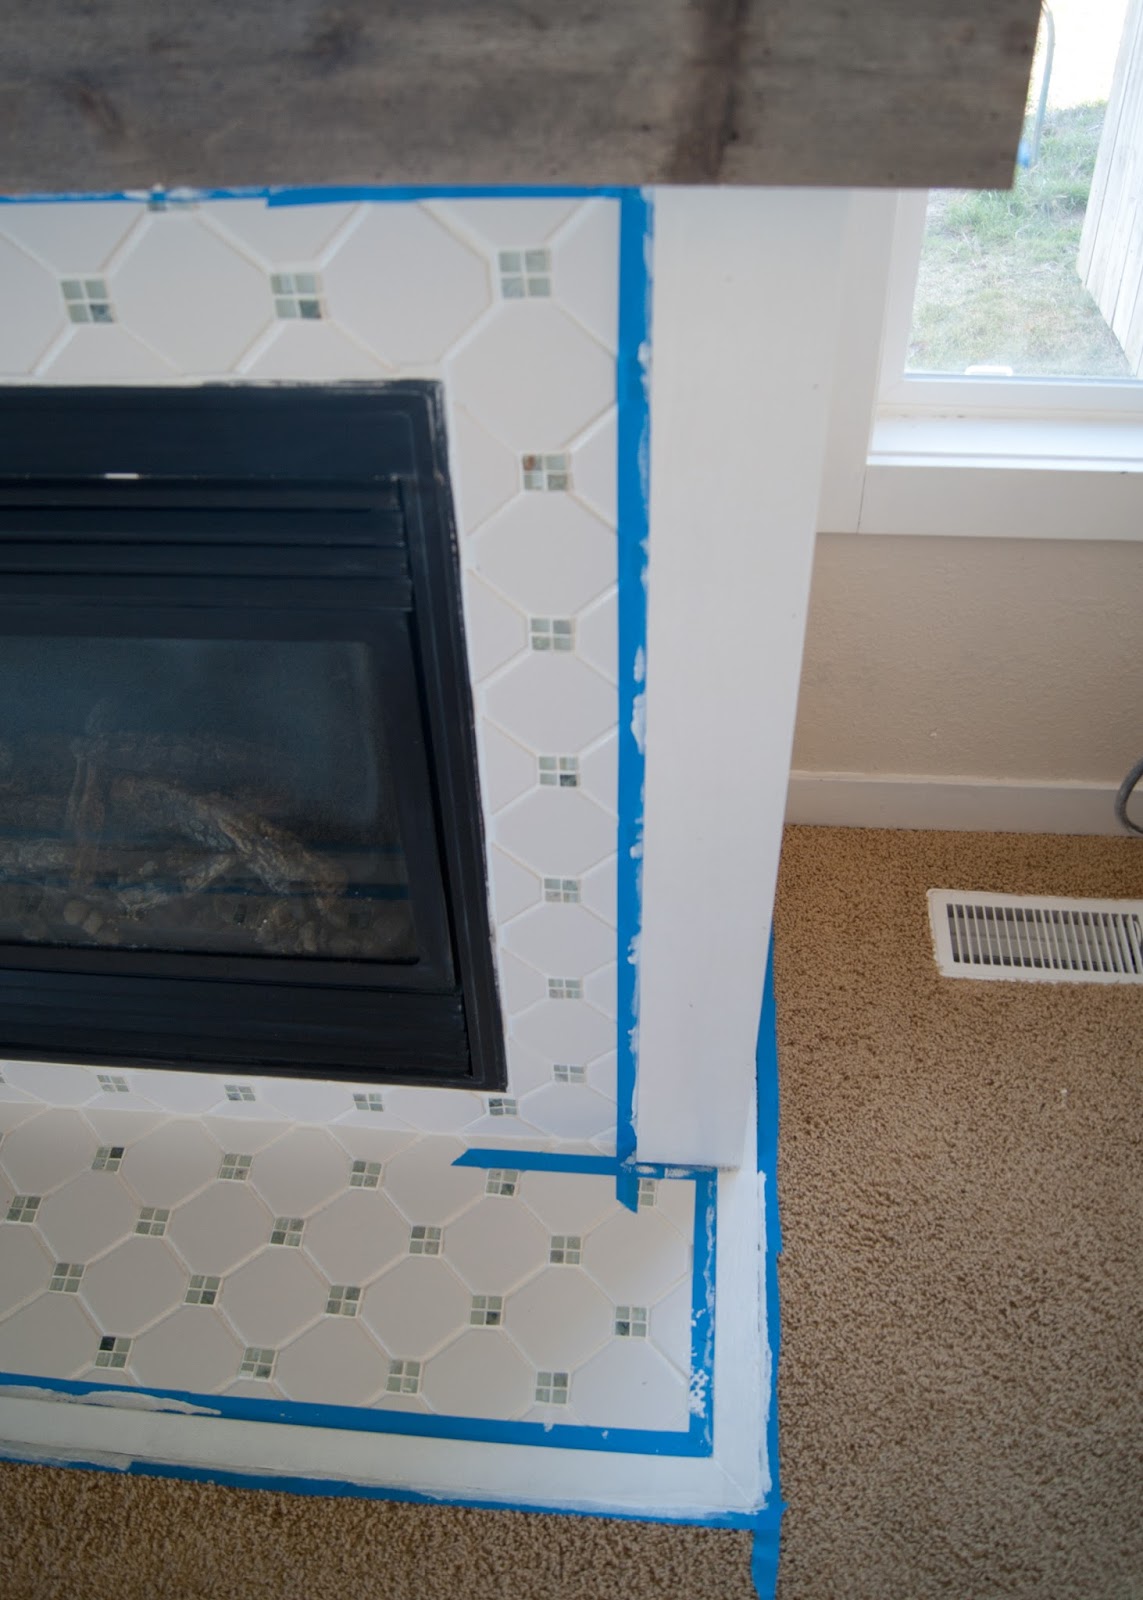 Fireplace Makeover - Grout, Paint & the best tool ever for caulking!